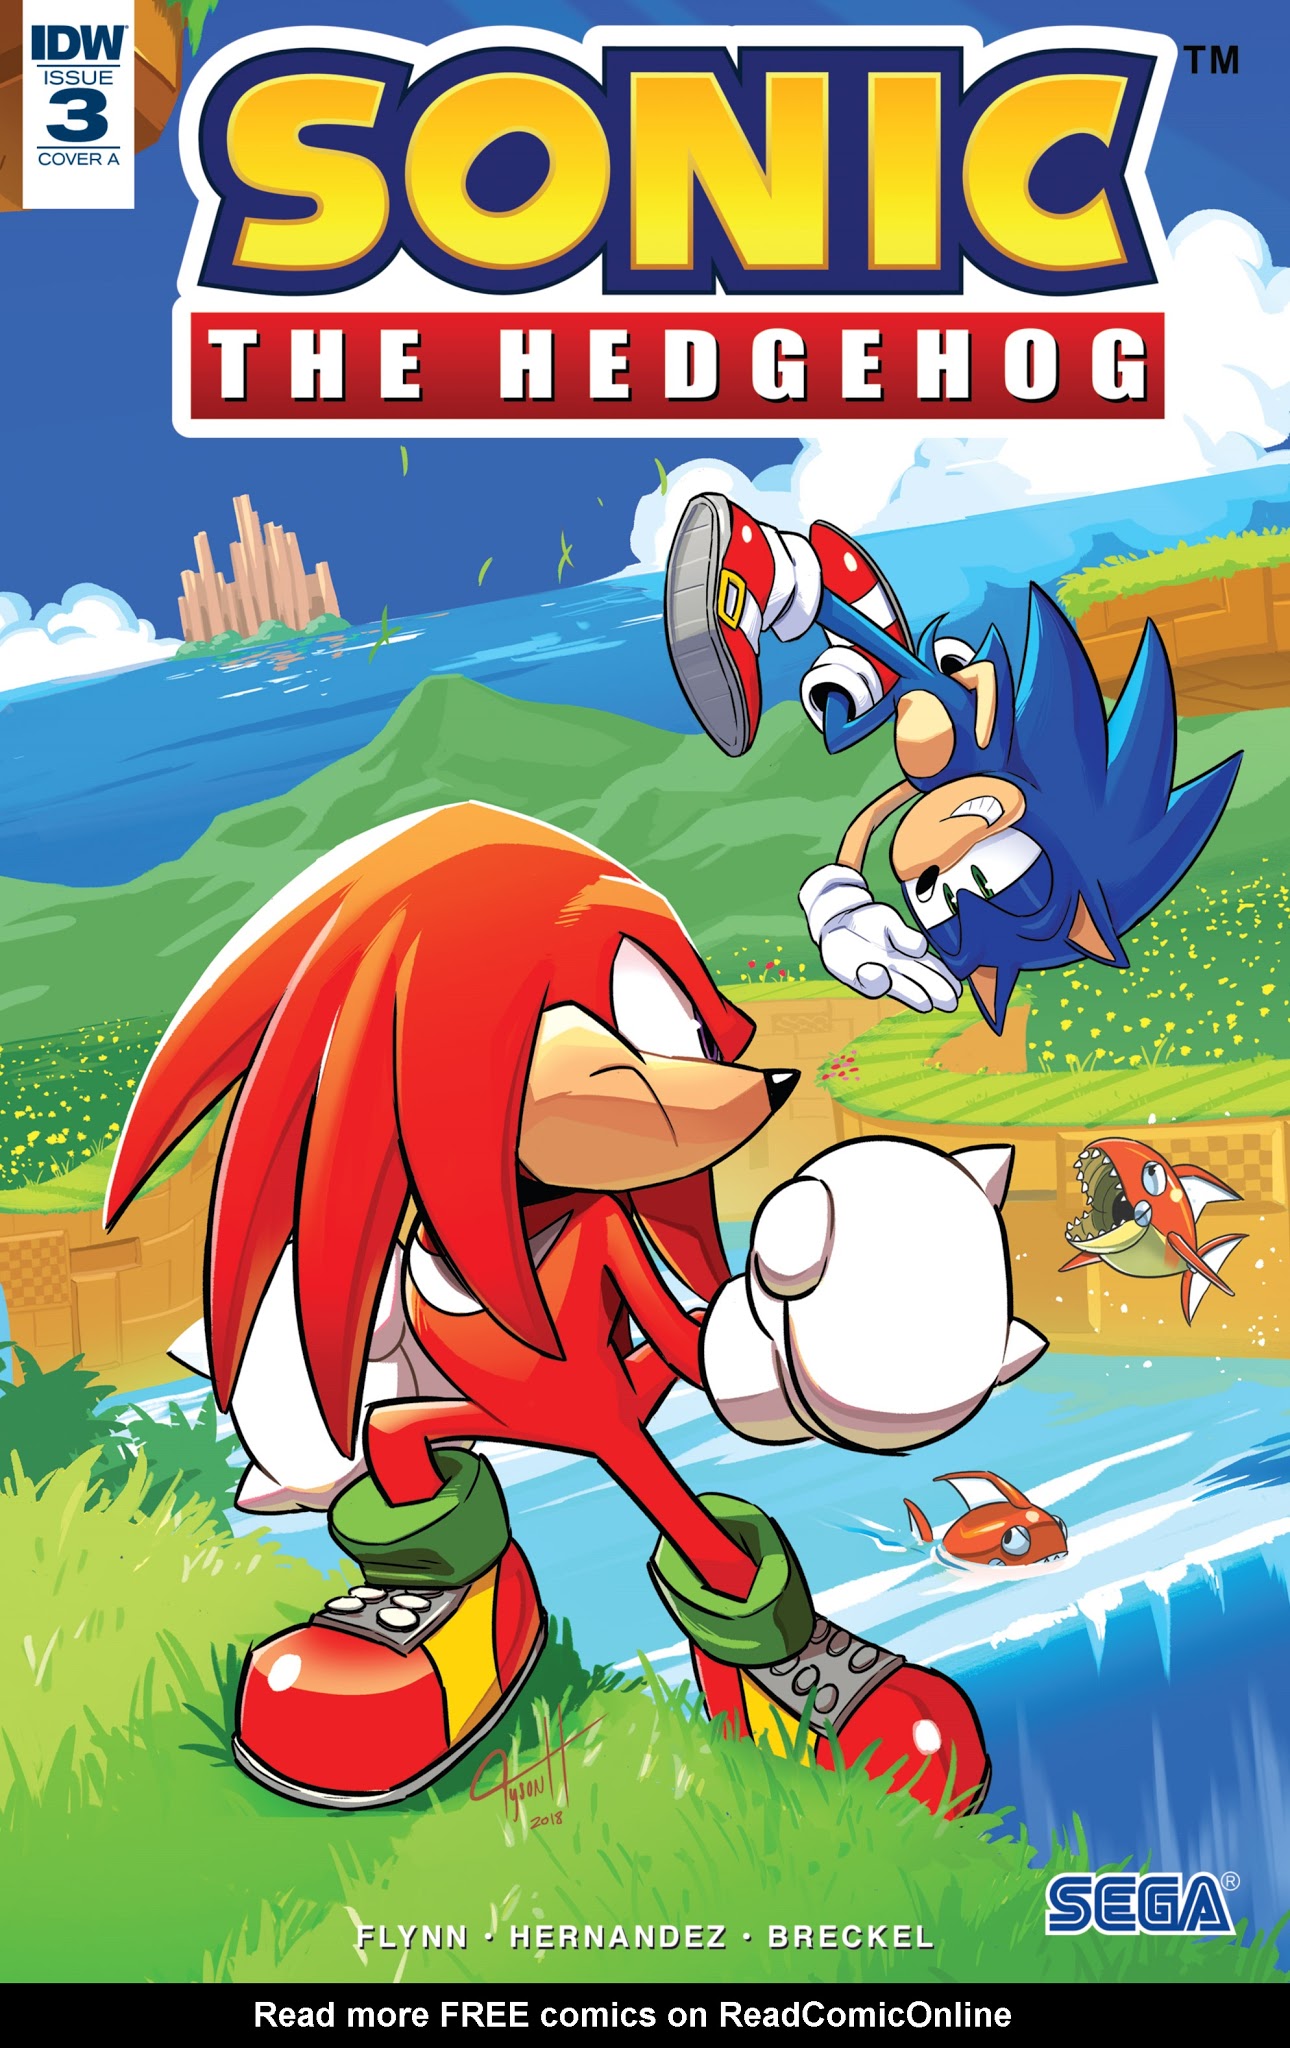 Sonic Tranny Porn - Sonic The Hedgehog 2018 Issue 3 | Read Sonic The Hedgehog 2018 Issue 3  comic online in high quality. Read Full Comic online for free - Read comics  online in high quality .| READ COMIC ONLINE